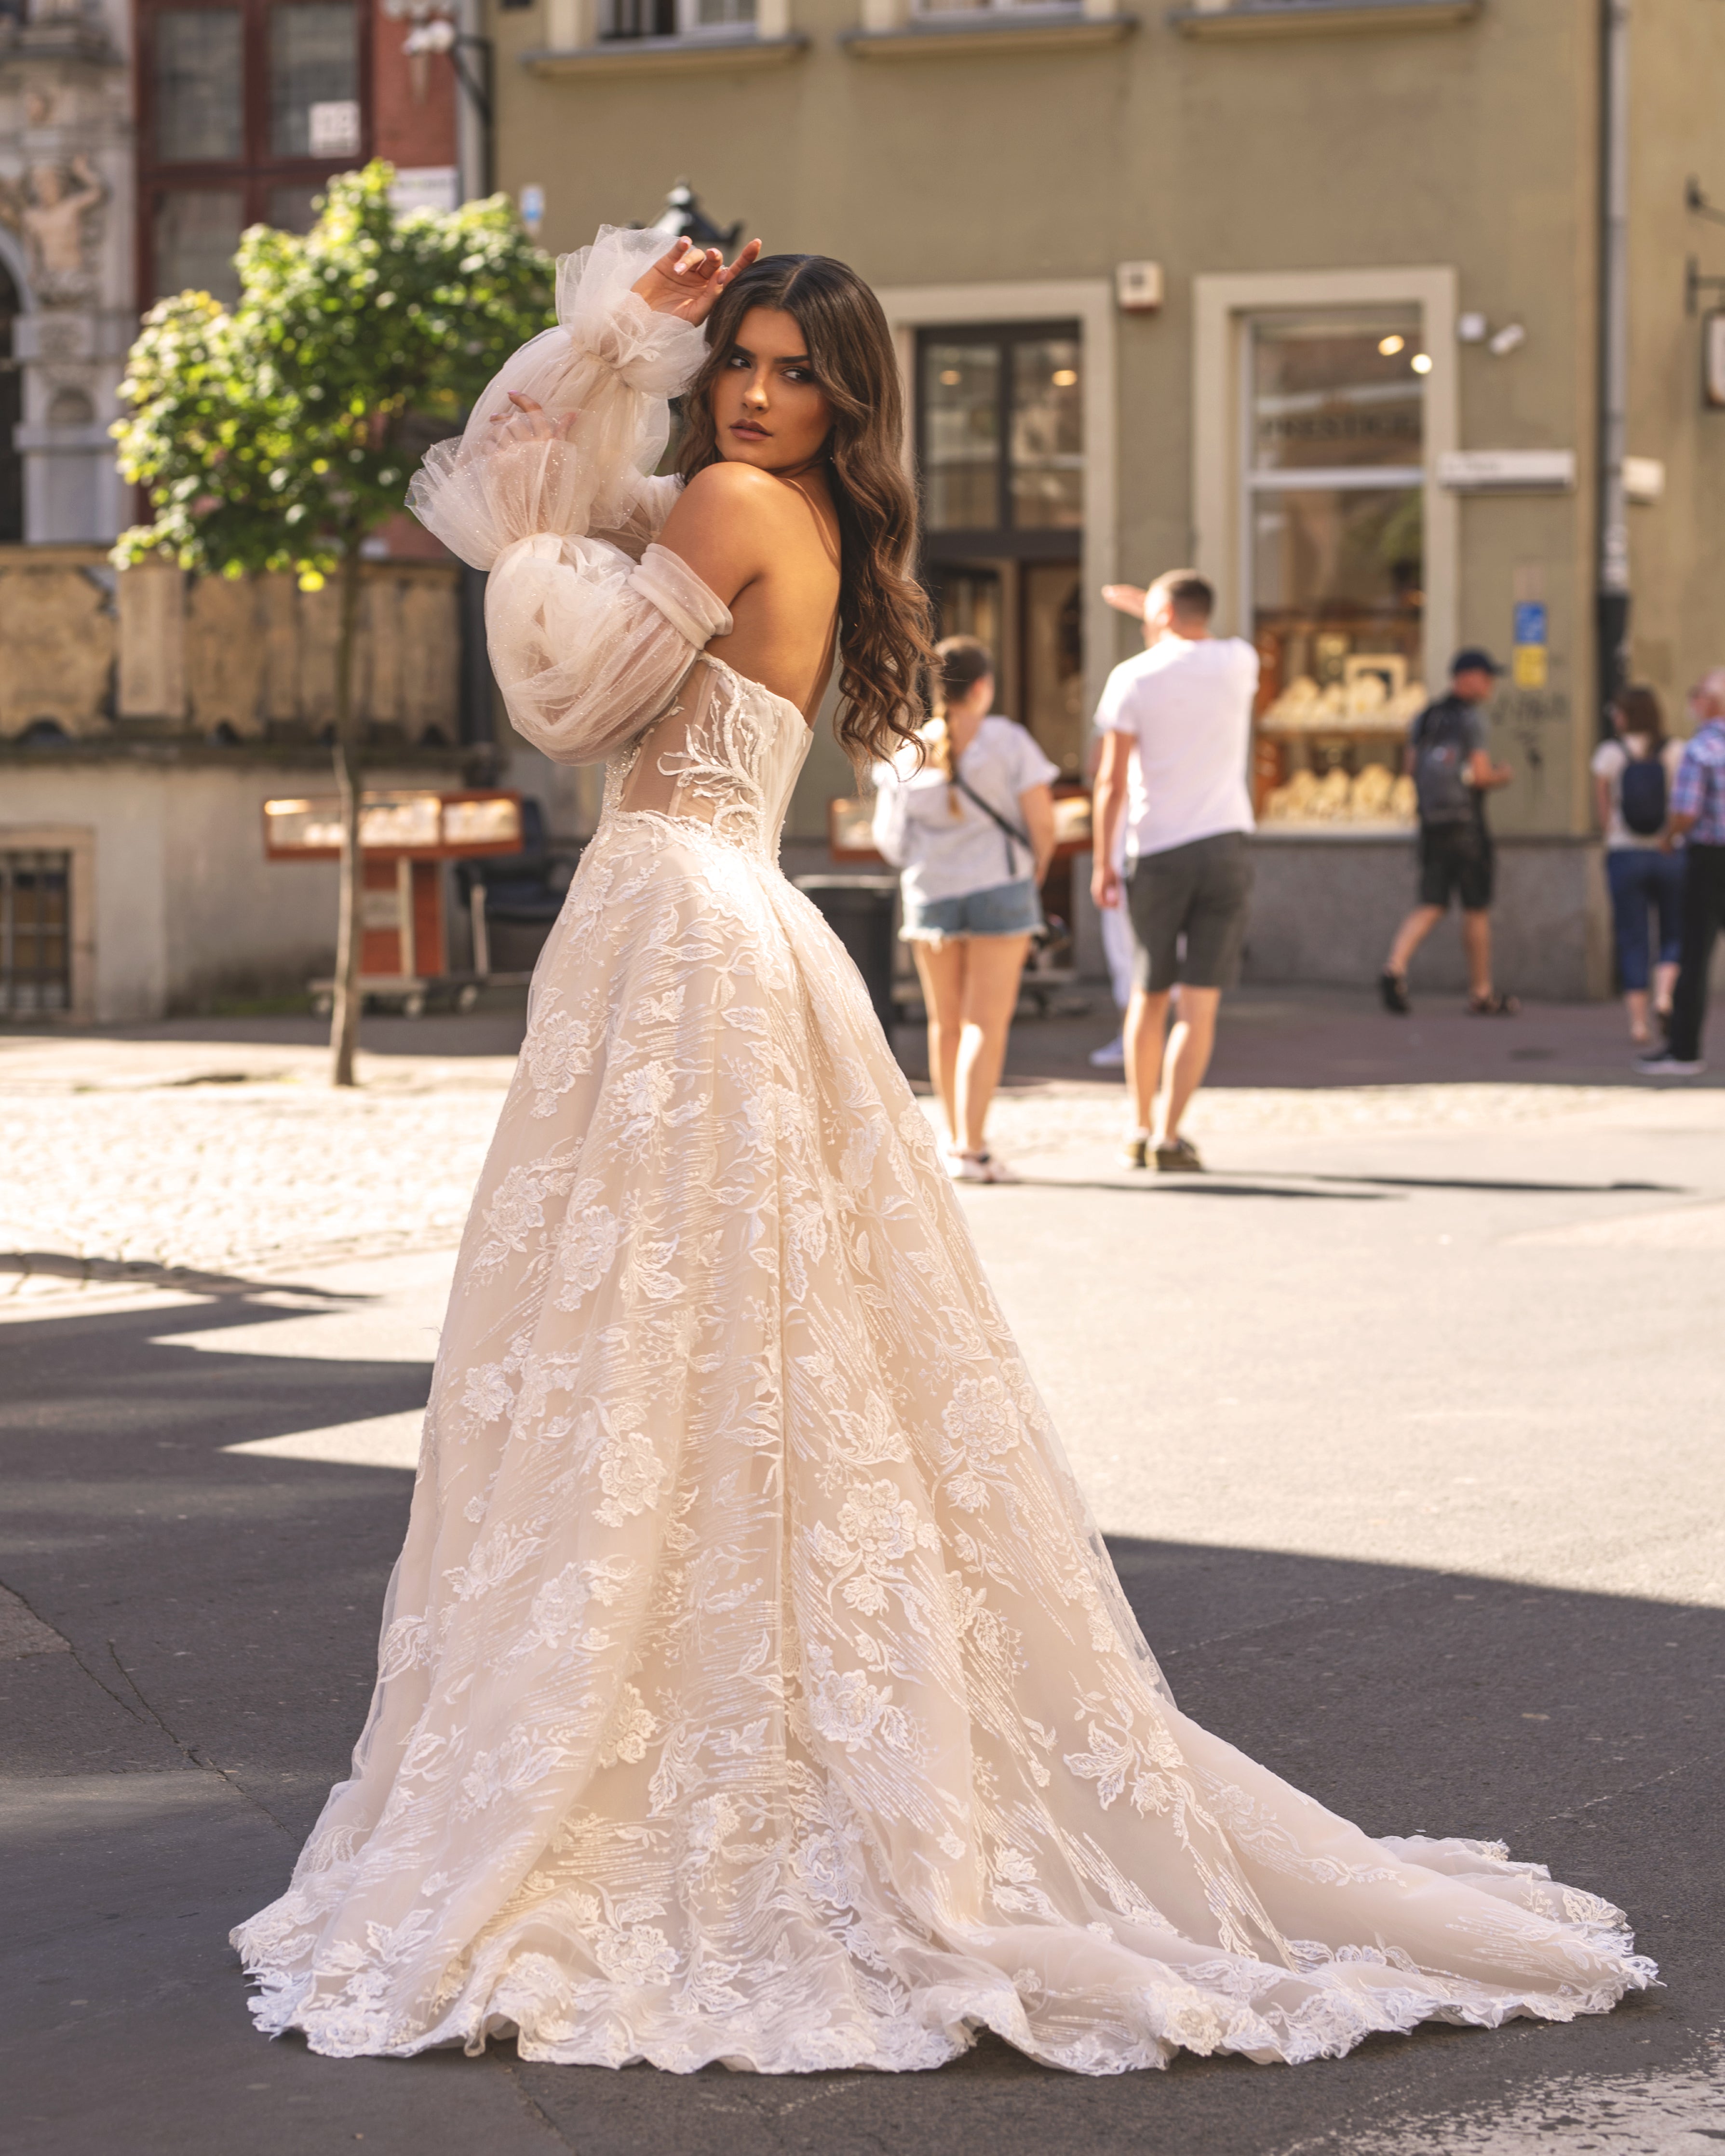 Michelle - Bohemian Nude Wedding Dress with Floral Applique - Maxima Bridal